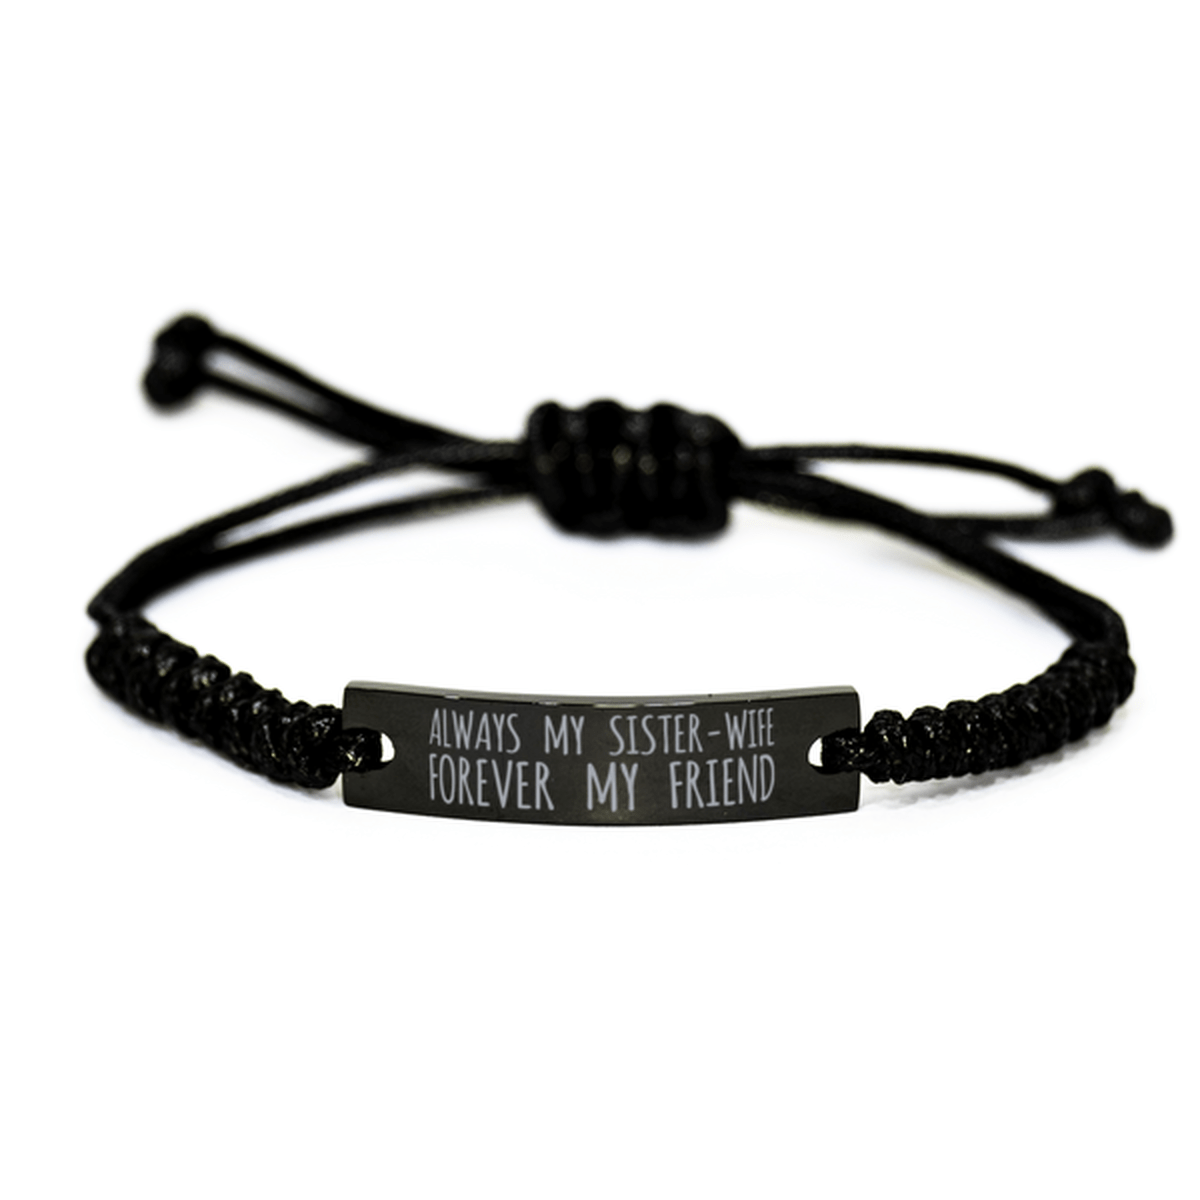 Inspirational Sister Wife Black Rope Bracelet, Always My Sister Wife Forever My Friend, Best Birthday Gifts For Family